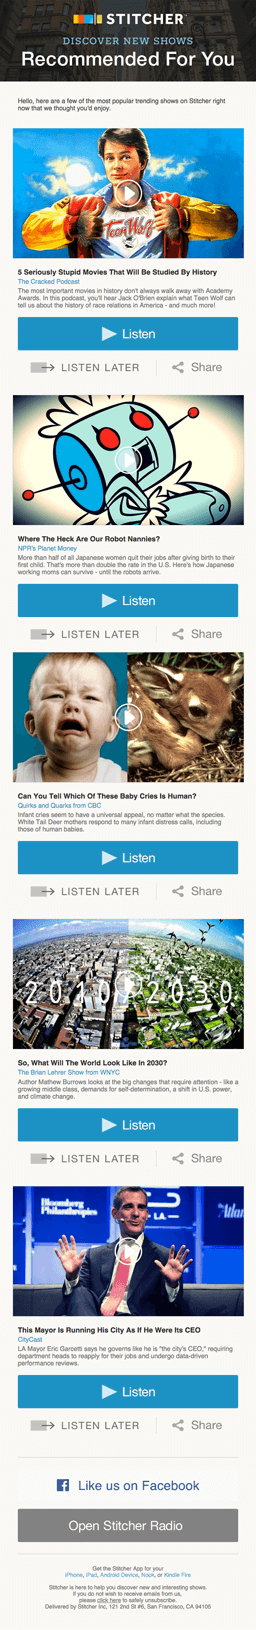 Email marketing campaign 'Recommended for You' by Stitcher